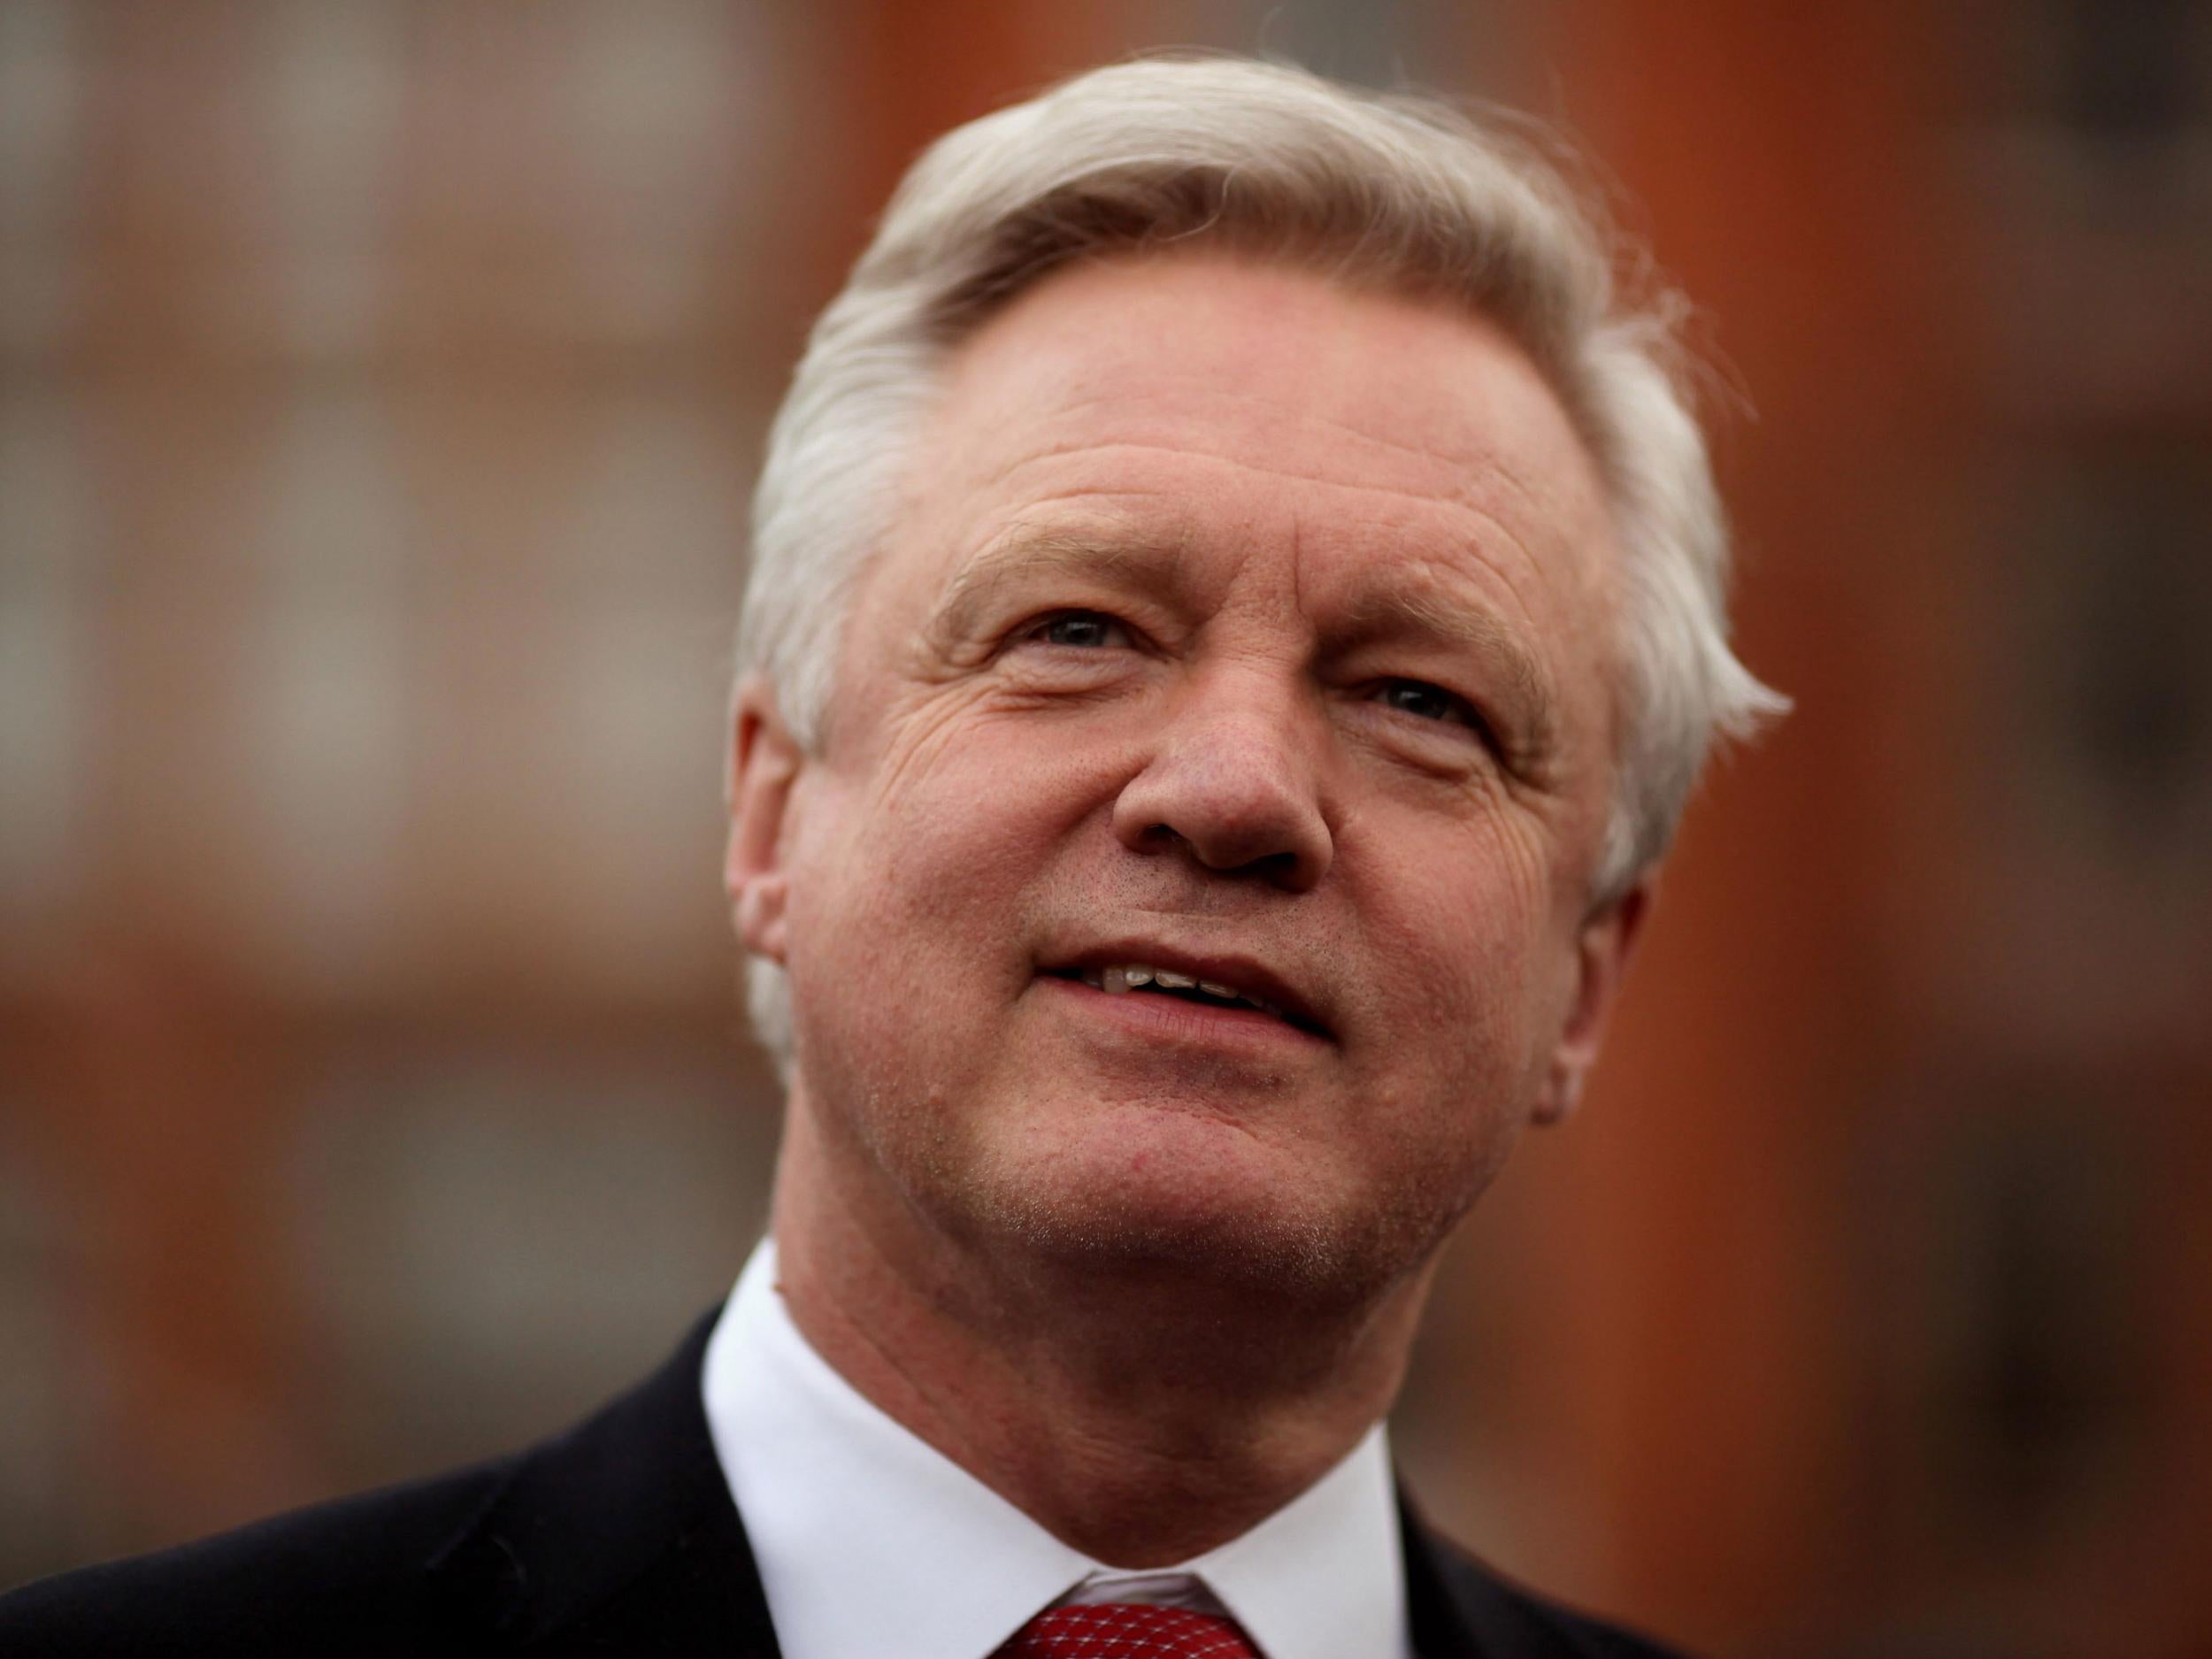 David Davis, the new Secretary of State for Exiting the European Union